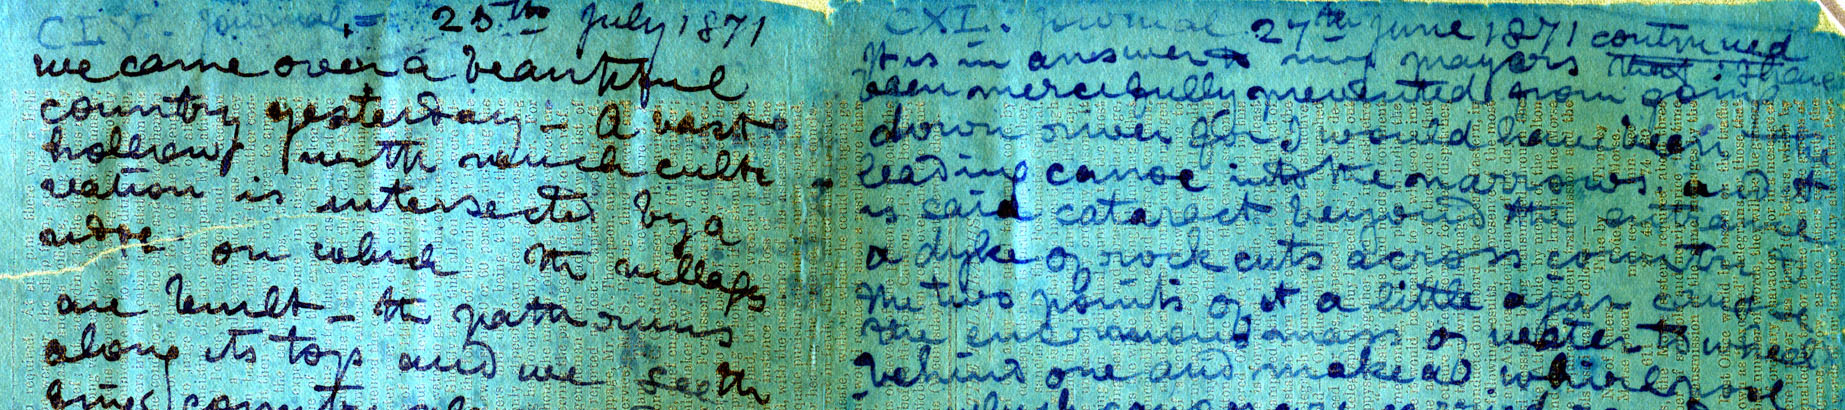 A processed spectral image of two pages of the 1871 Field Diary (Livingstone 1871f:CLV-CXL spectral_ratio), detail. Copyright David Livingstone Centre, Blantyre. As relevant, copyright Dr. Neil Imray Livingstone Wilson. Creative Commons Attribution-NonCommercial 3.0 Unported (https://creativecommons.org/licenses/by-nc/3.0/).